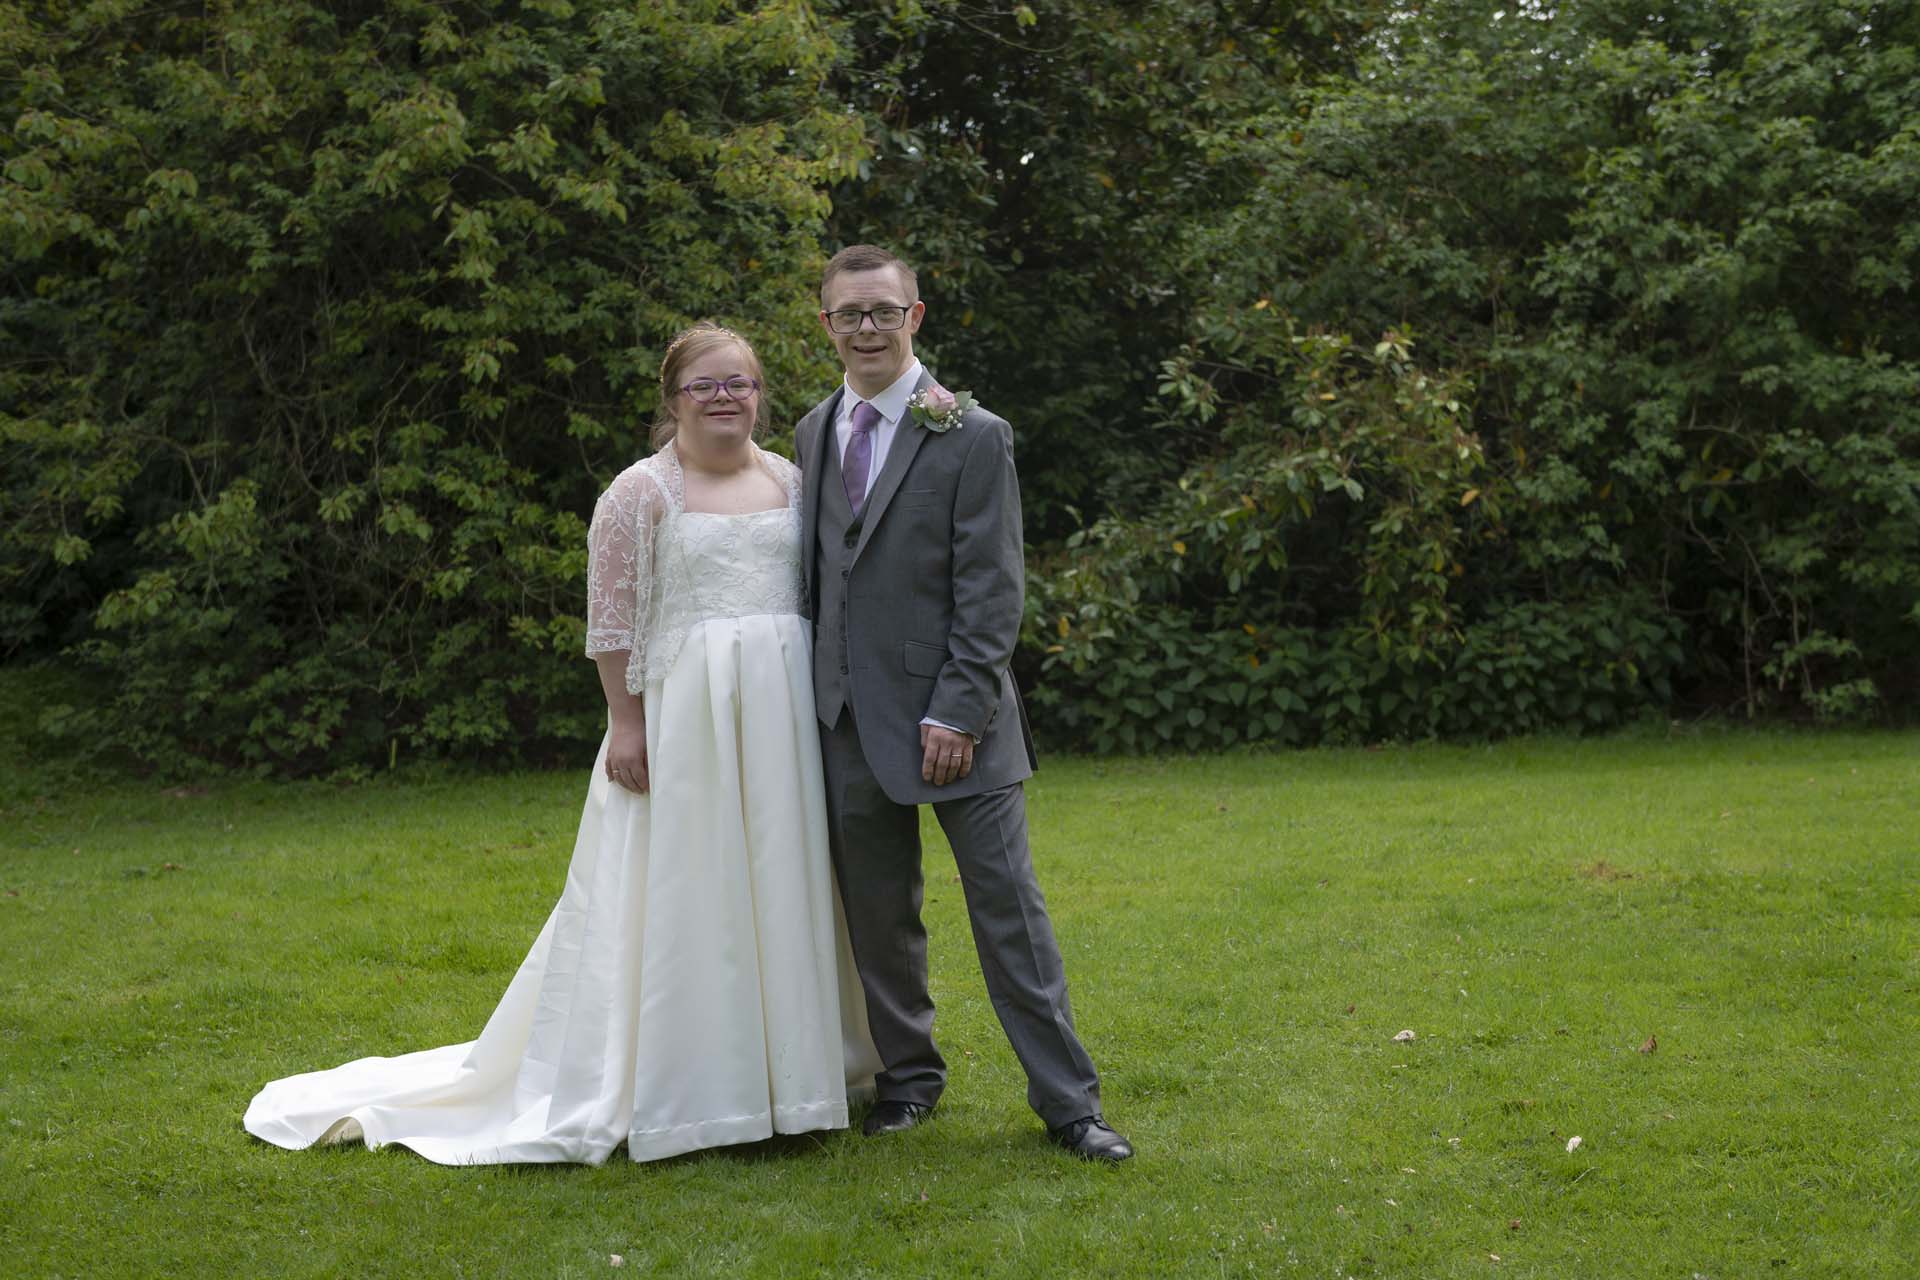 James Heidi wedding Coventry Down's syndrome extra chromosome screen us out